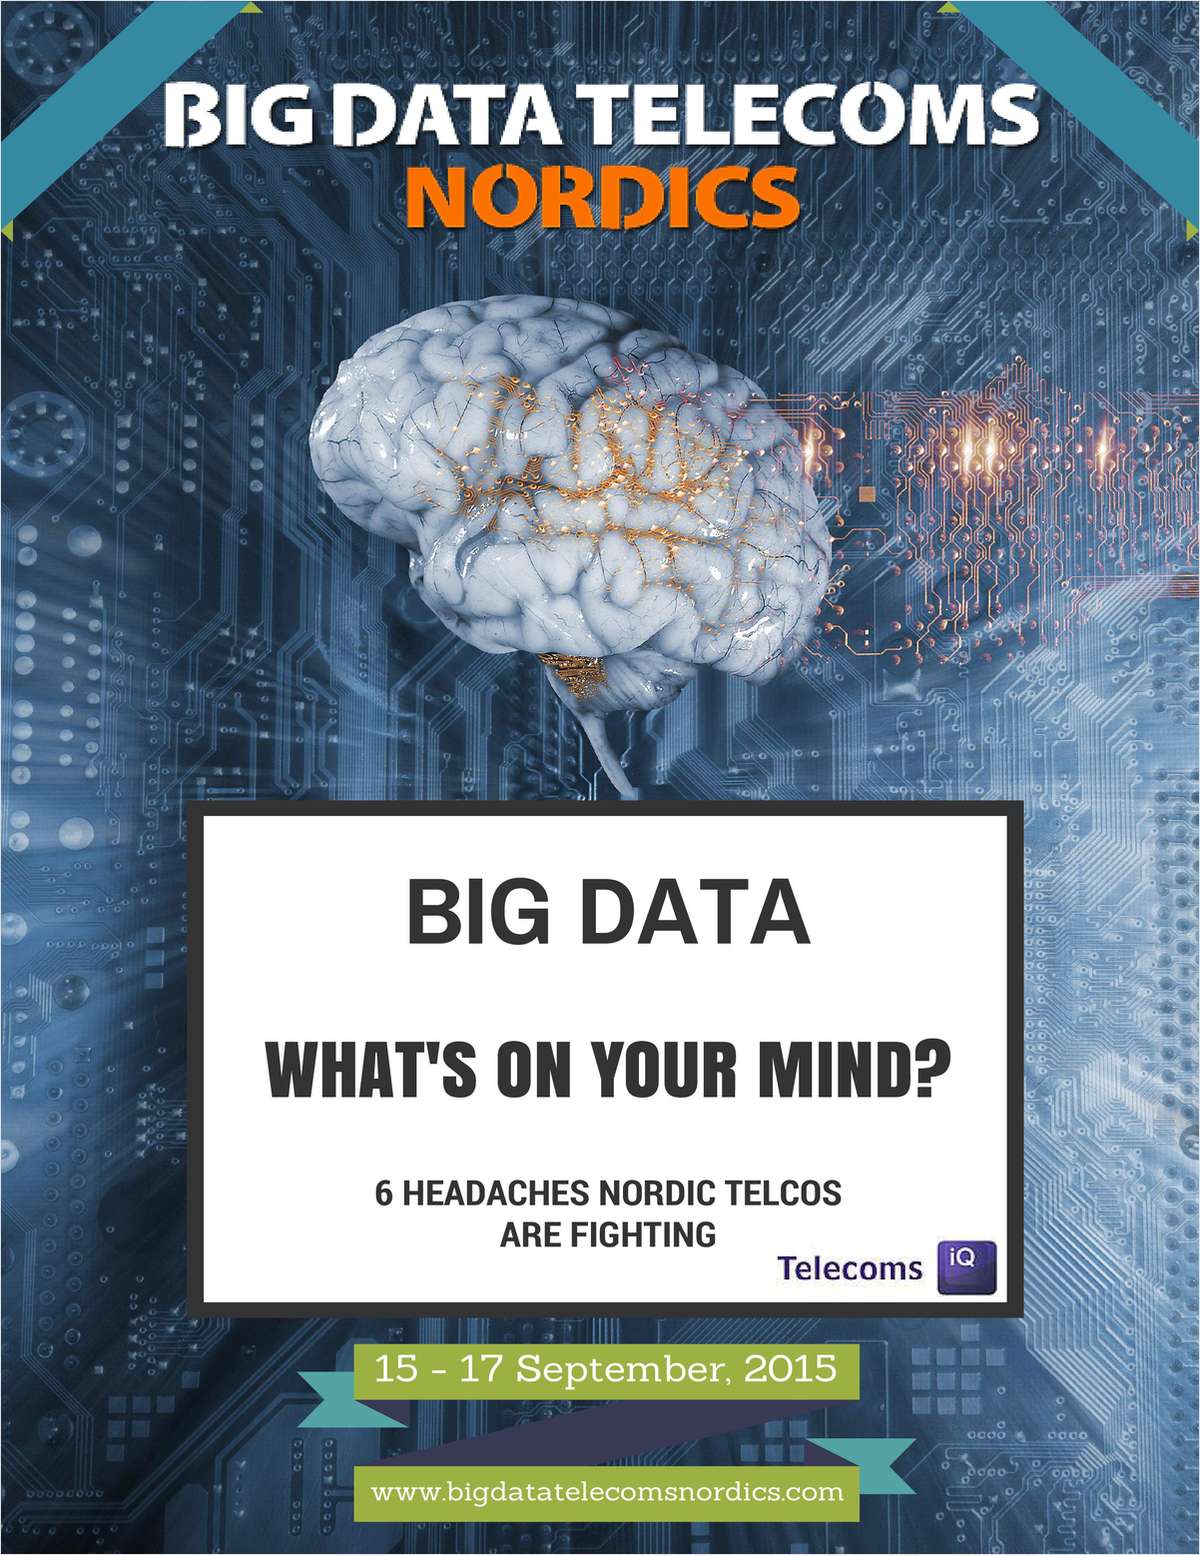 Big Data: 6 Headaches Nordic Telcos Are Fighting